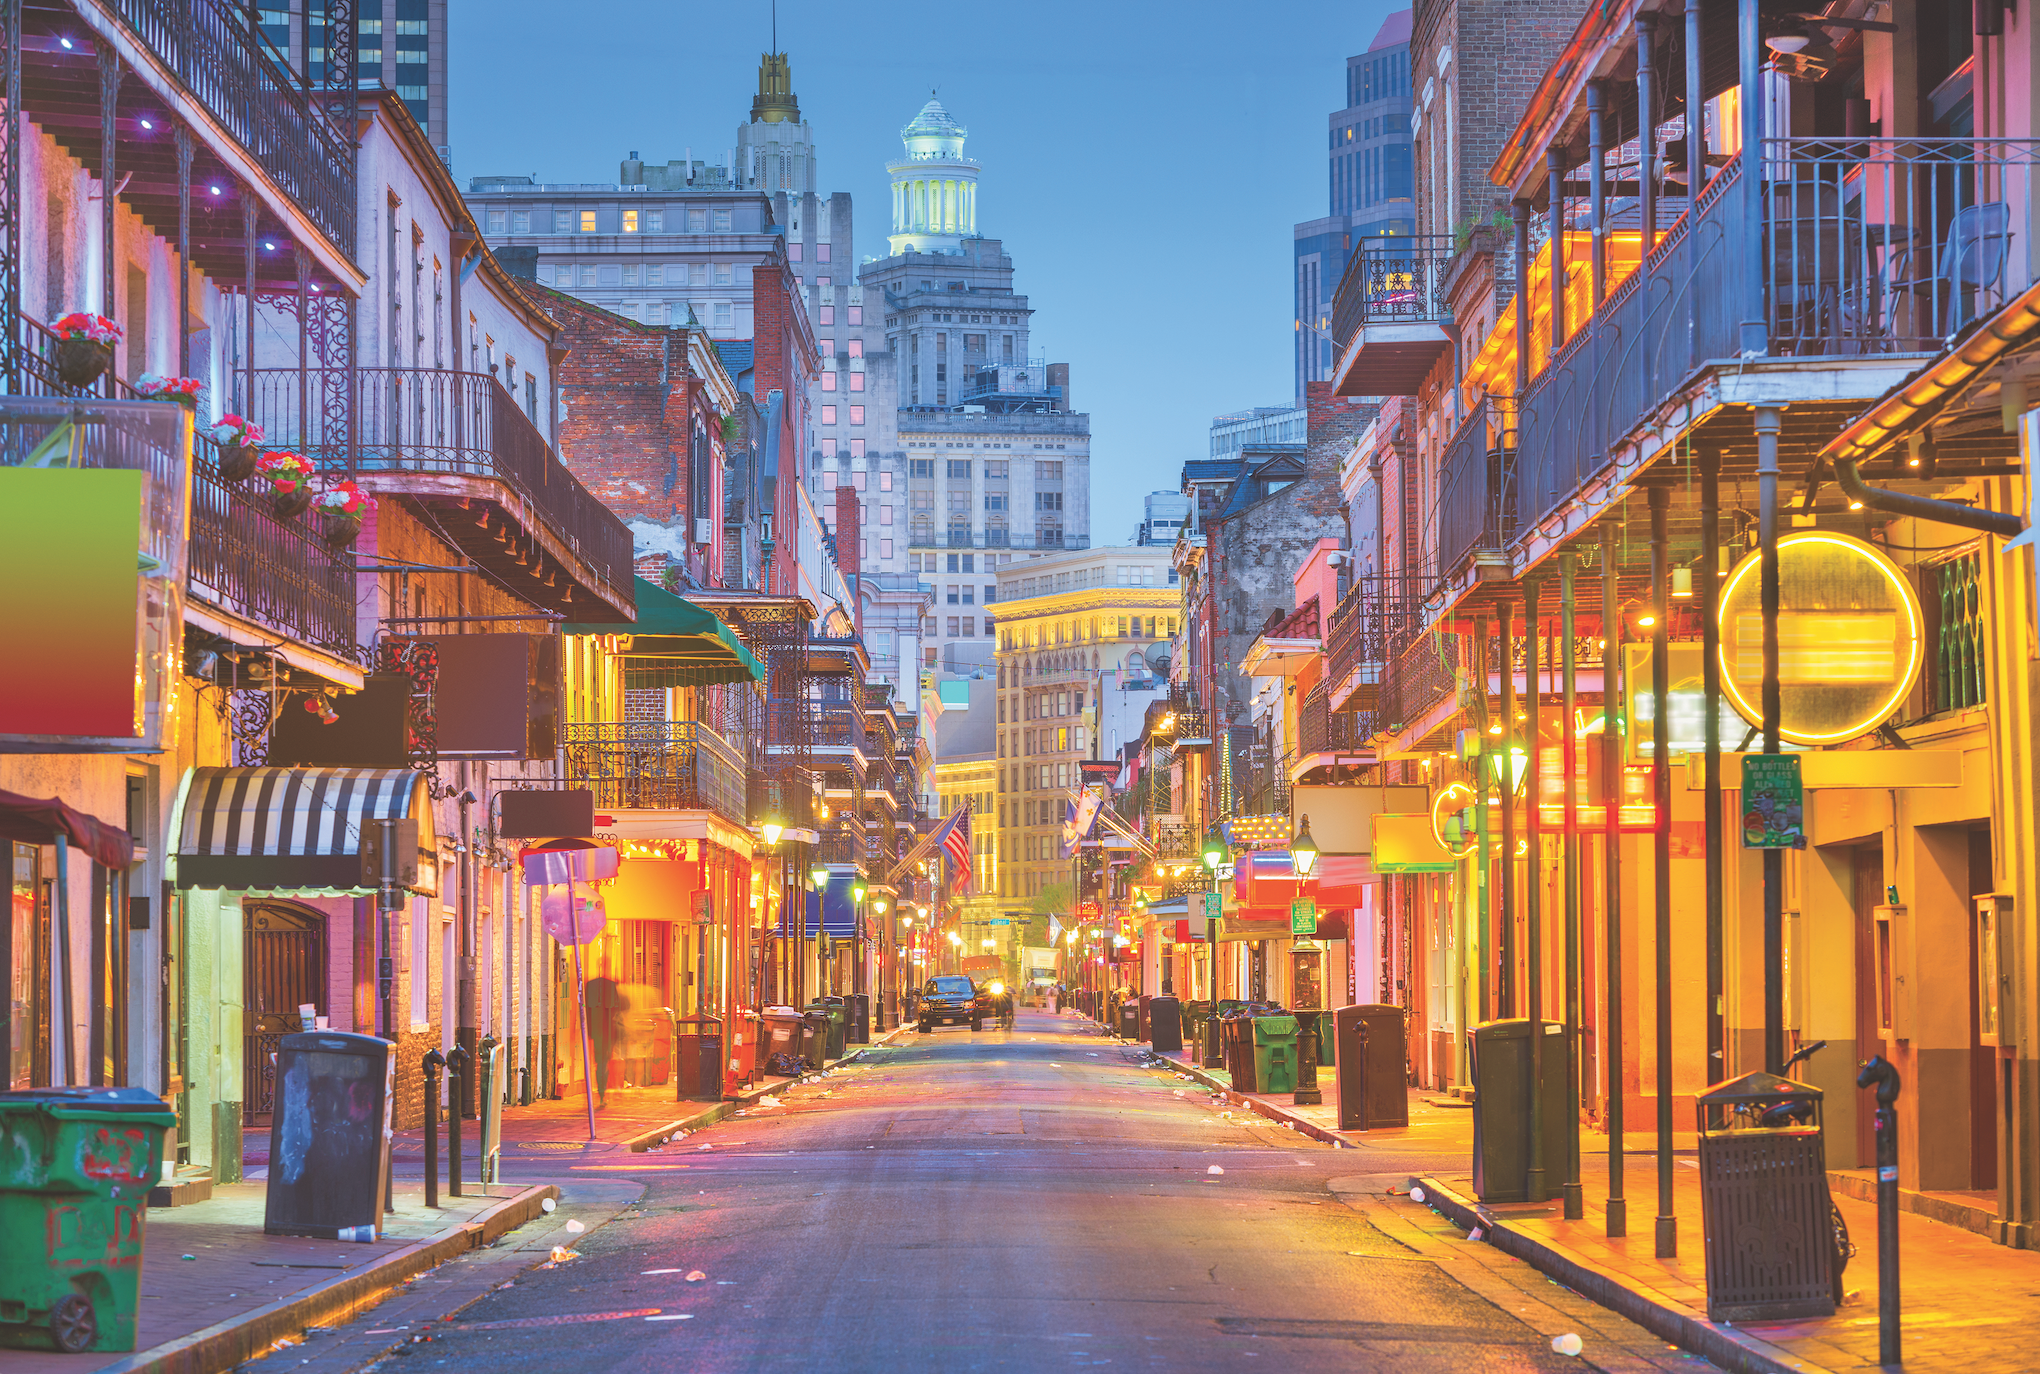 Ophthalmology in the Big Easy: AAO 2021 welcomes in-person attendees